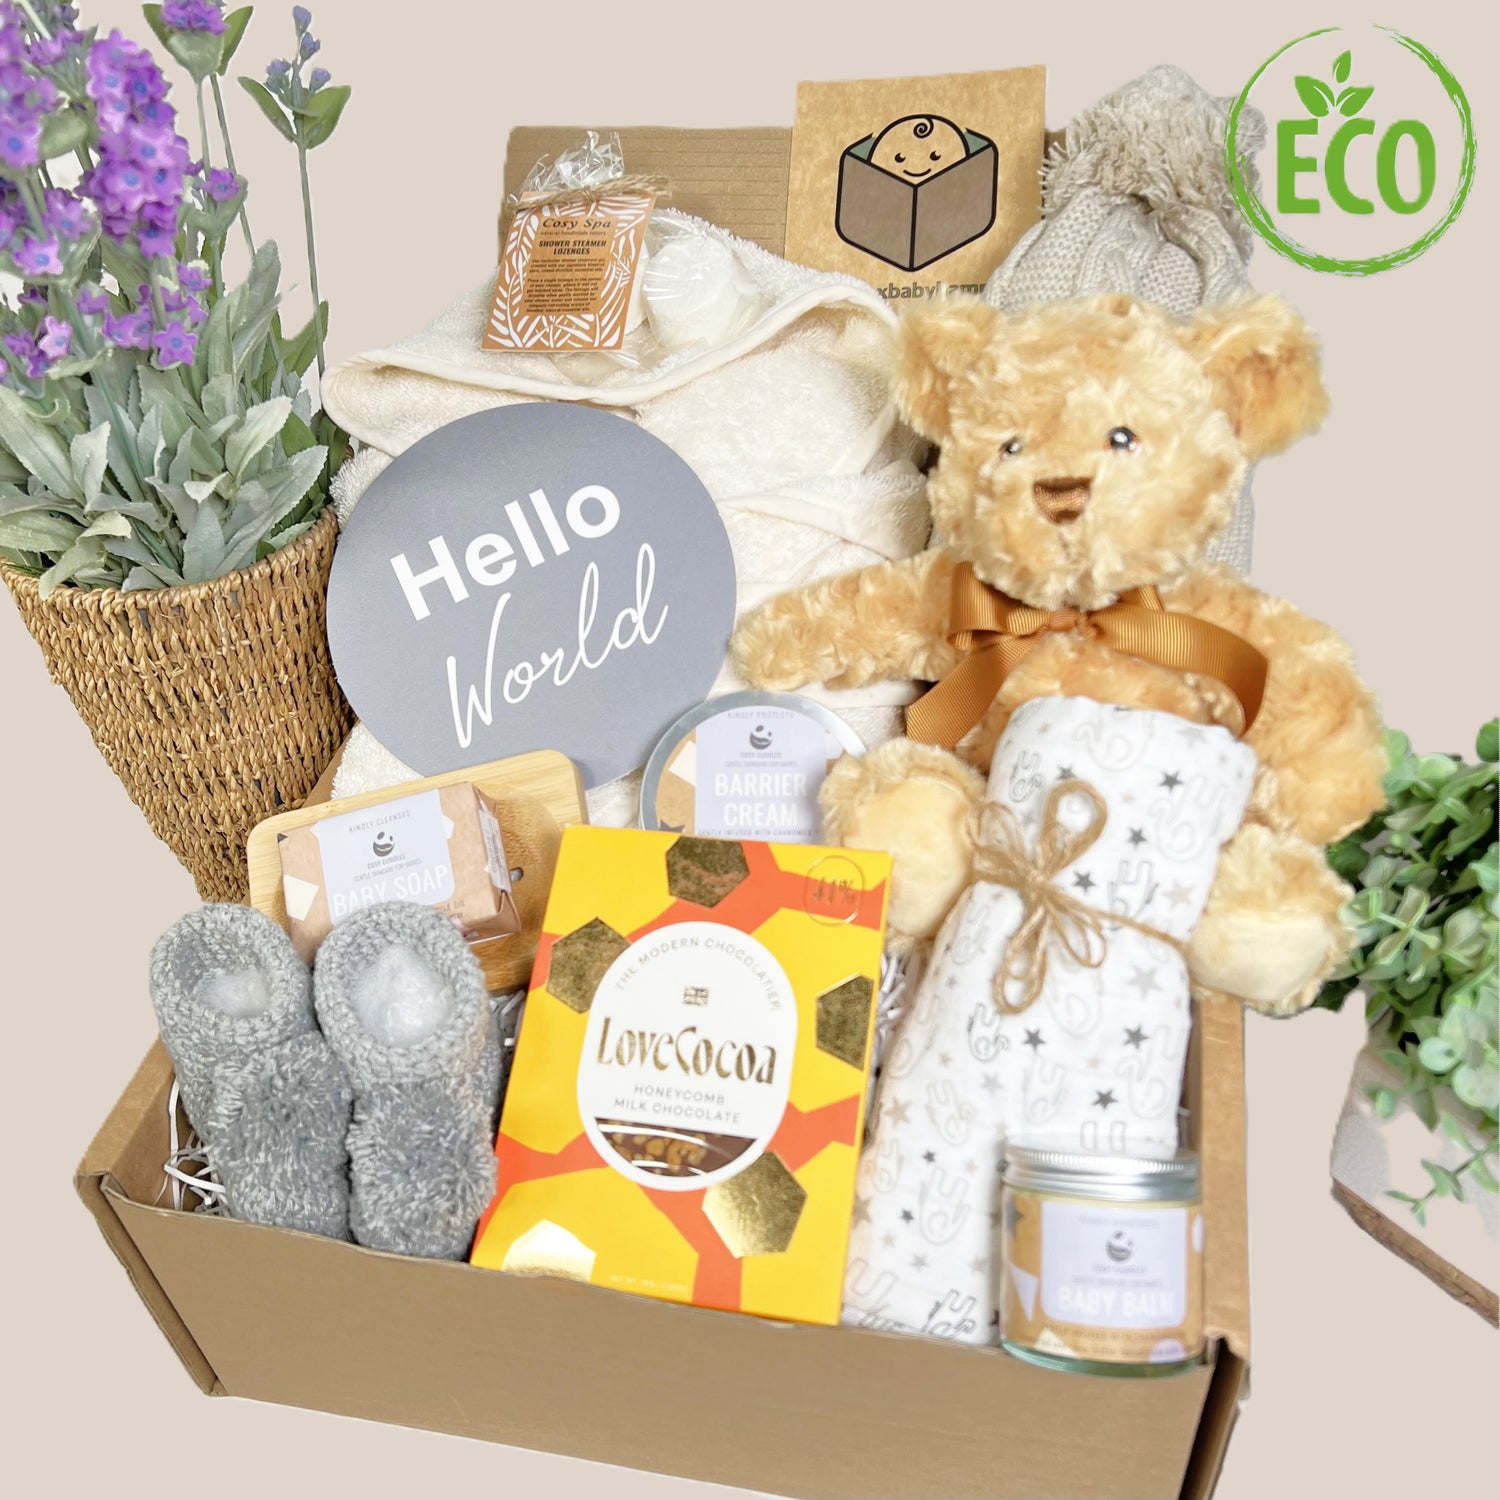 The Top 10 Eco-Friendly Baby Shower Gifts – Petite Comporta